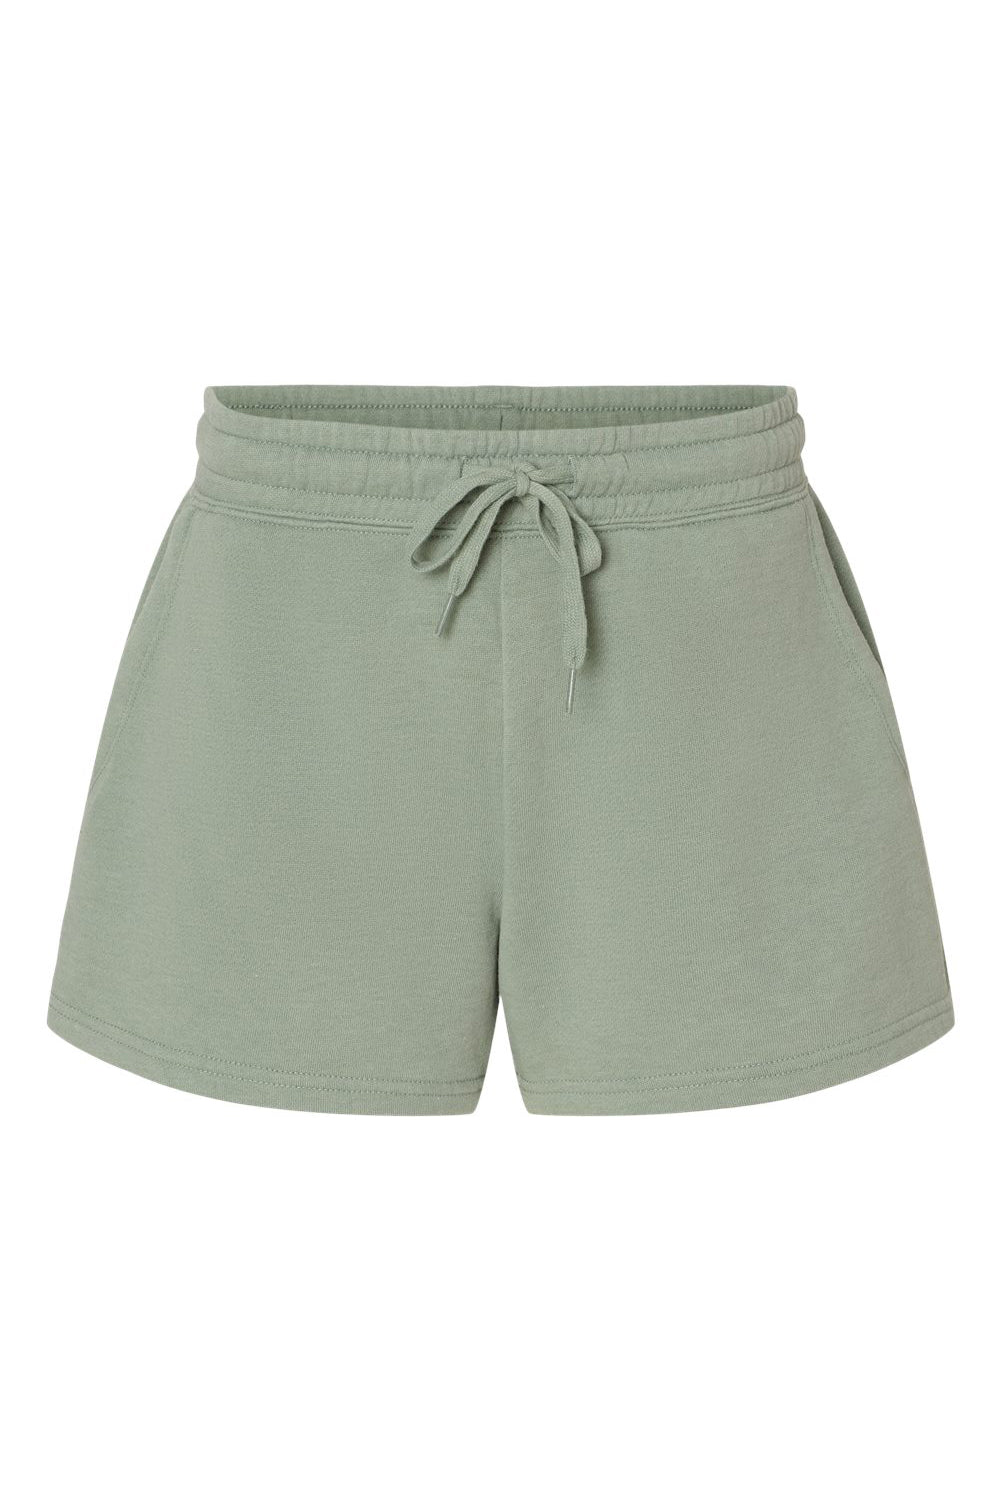 Independent Trading Co. PRM20SRT Womens California Wave Wash Fleece Shorts w/ Pockets Sage Green Flat Front